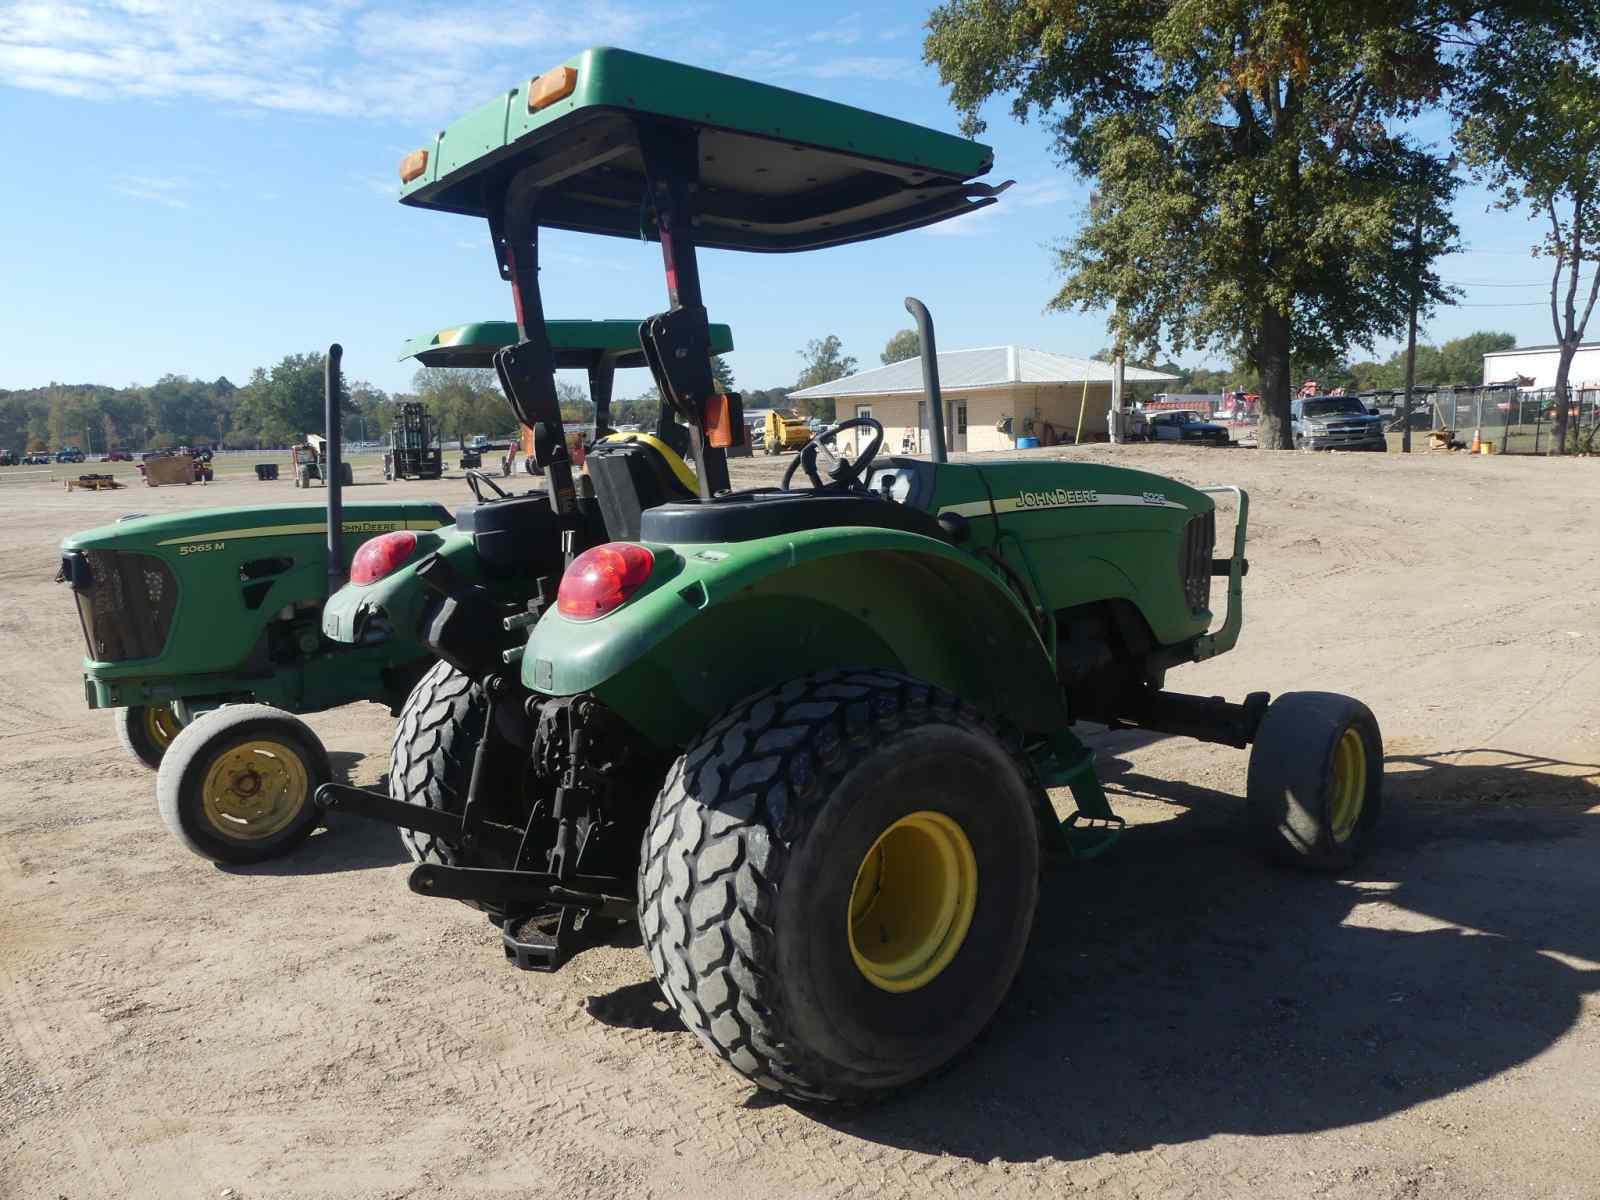 John Deere 5225 Tractor, s/n LV5225S320039: 2wd, Canopy, Turf Tires, PTO, H